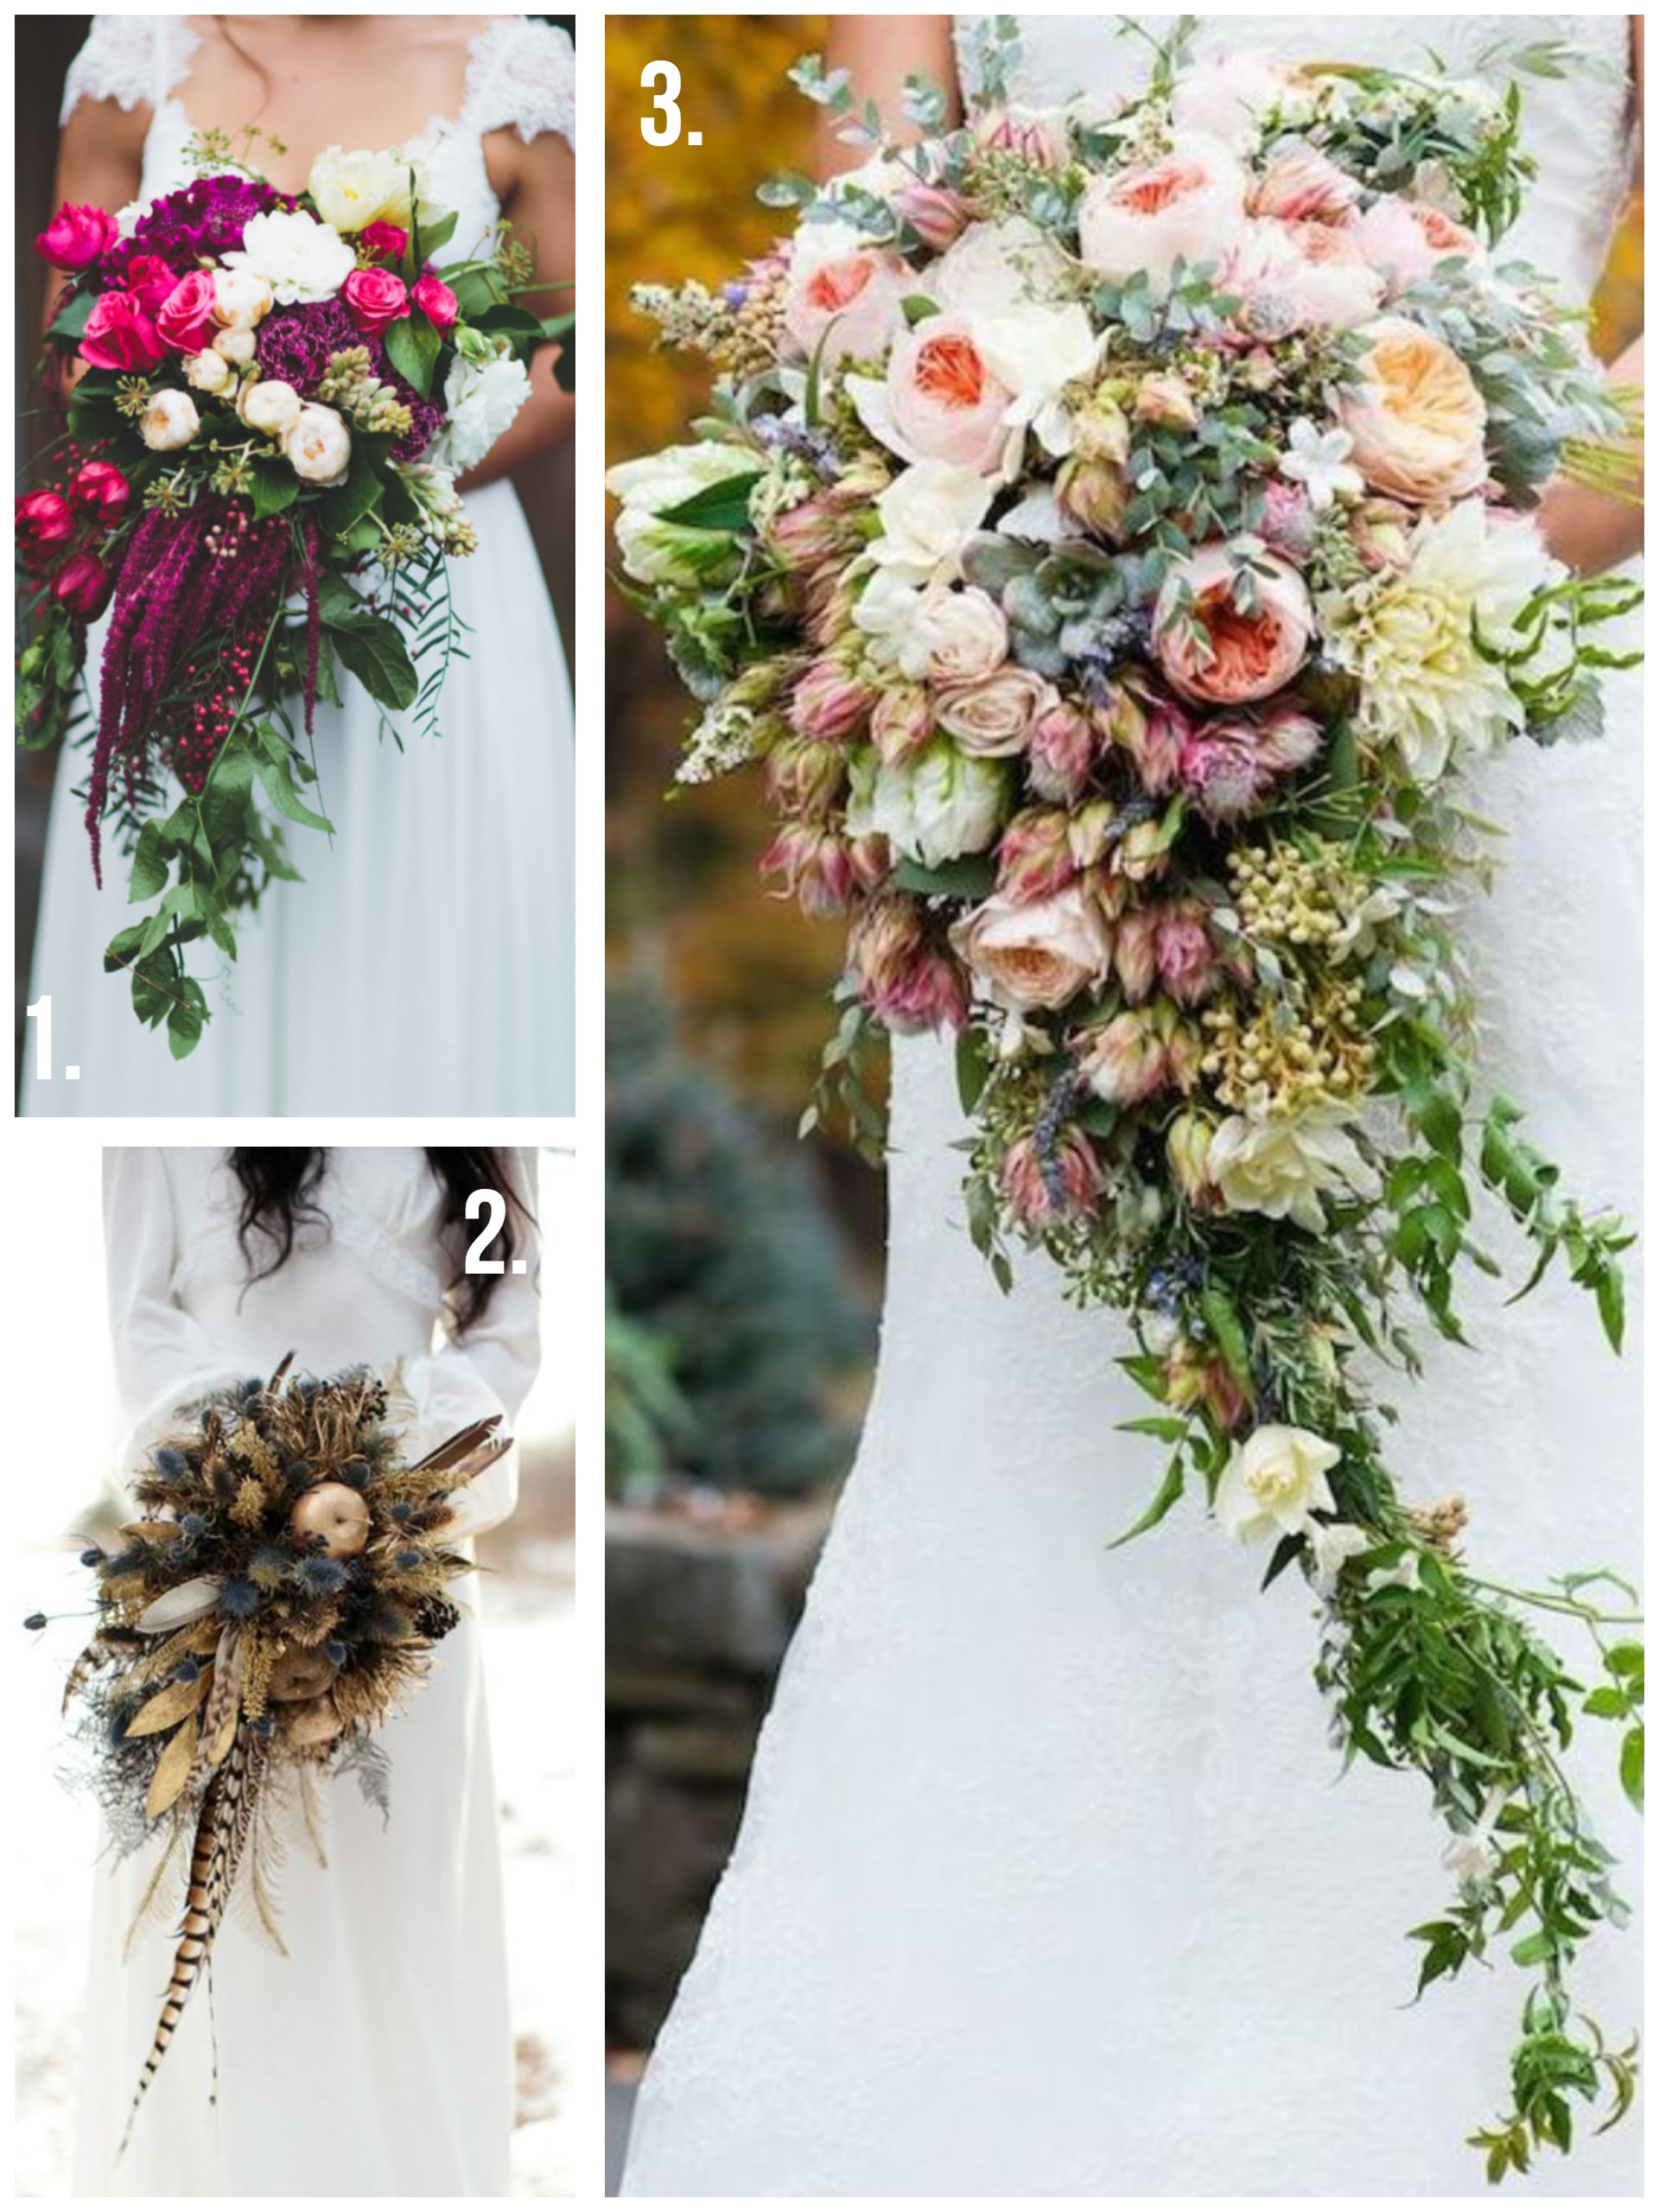 Wedding bouquets - three panel image of three different kinds of cascade bouquets